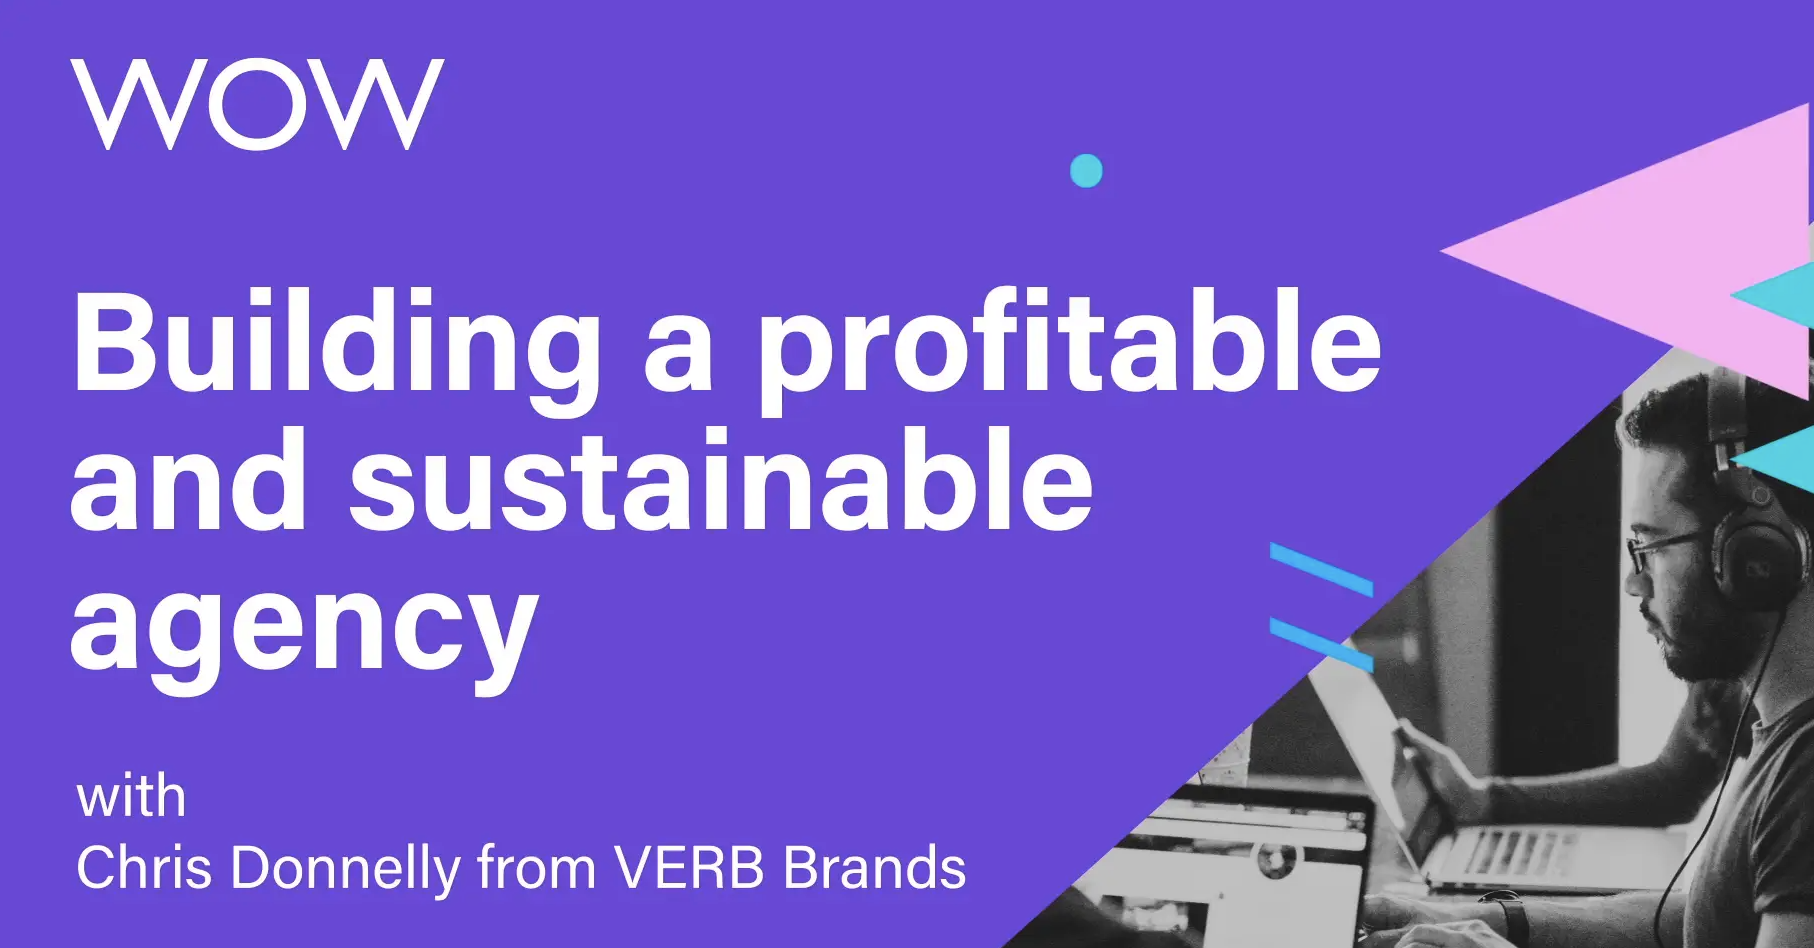 Chris Donnelly from Luxury Digital Marketing Agency VERB Brands talks on the Wow Accountancy webinar about building a profitable and sustainable agency.